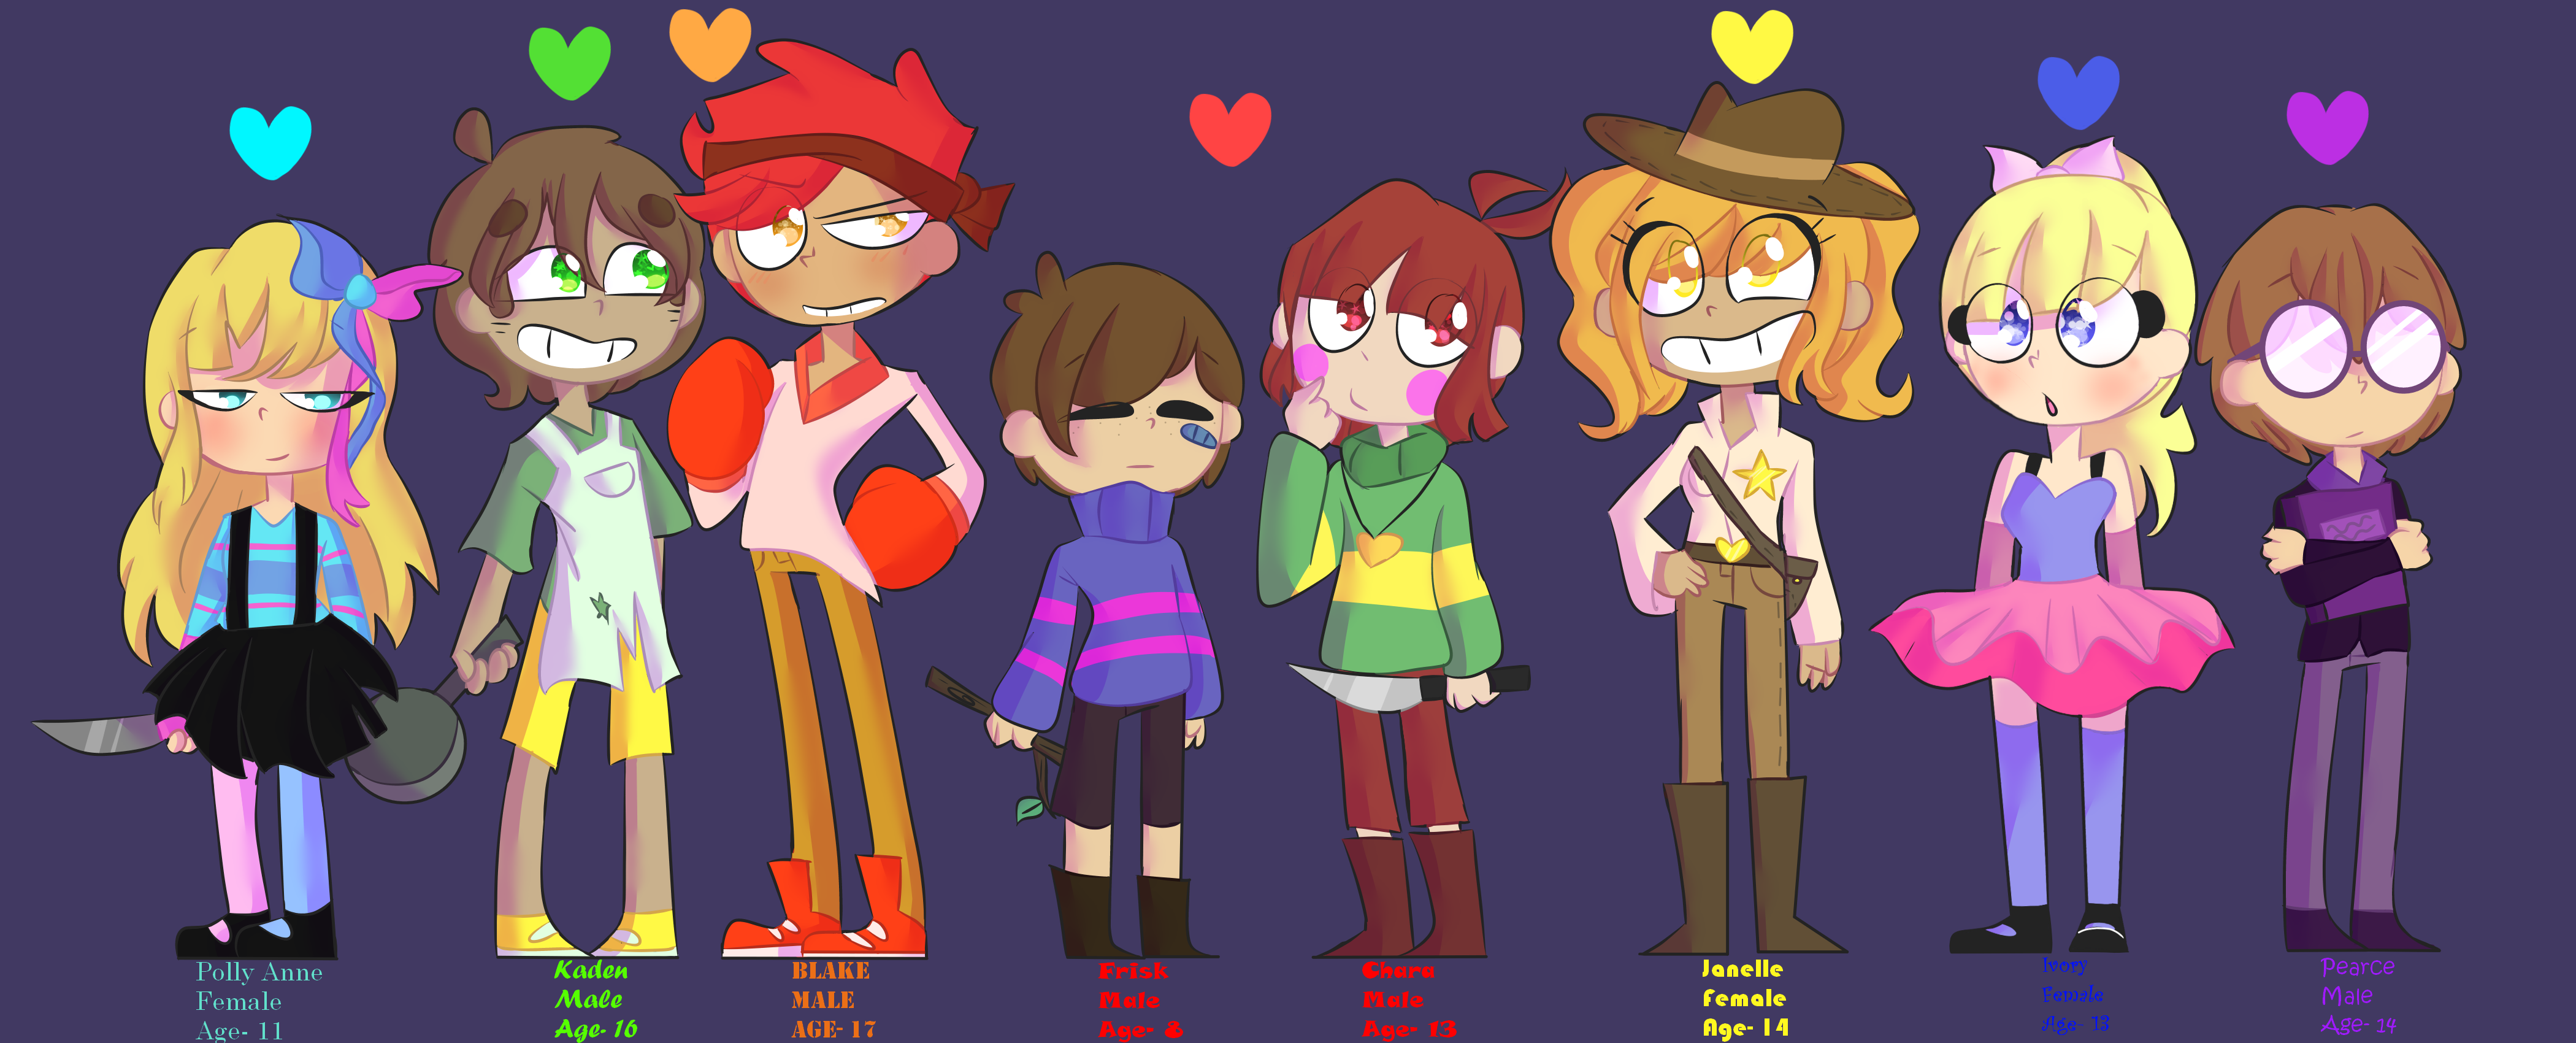 The Eight Human Souls Redraw By Maditani On Deviantart